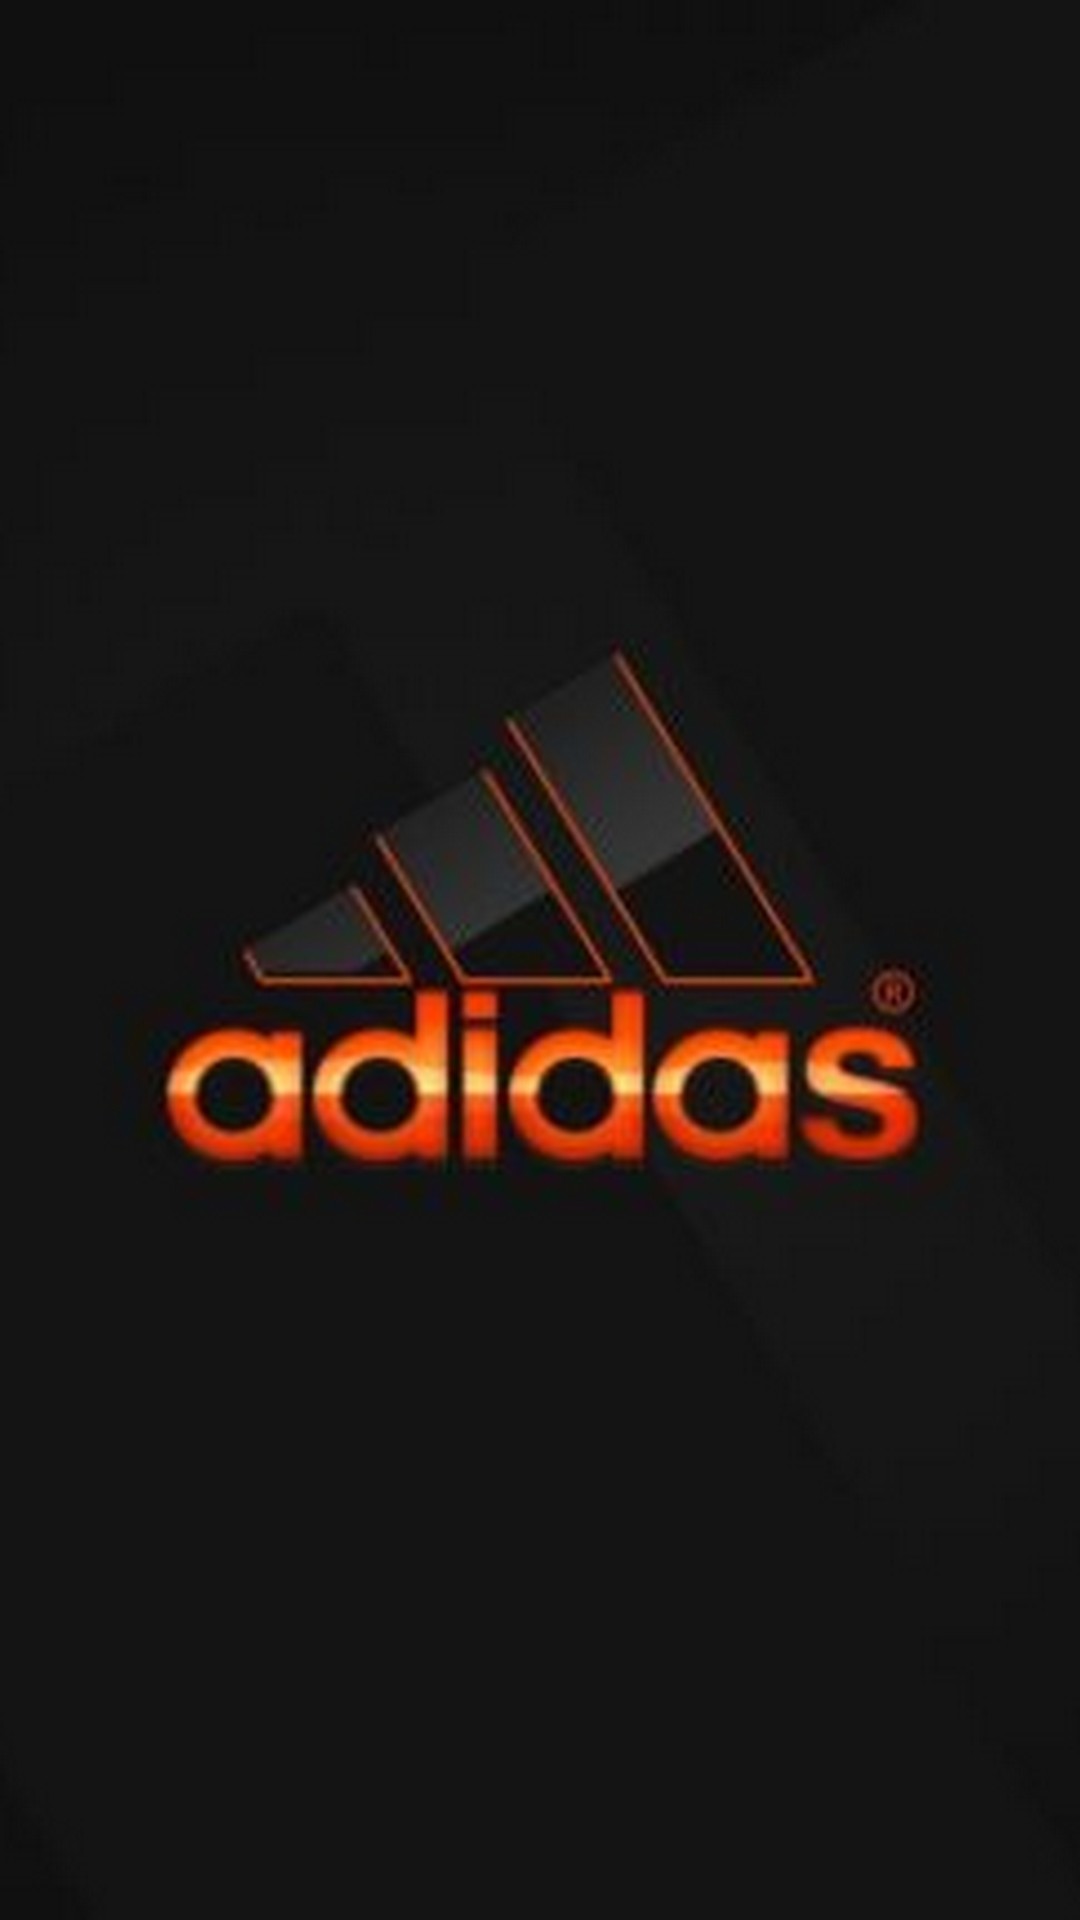 Adidas Phone Backgrounds With high-resolution 1080X1920 pixel. You can use this wallpaper for your Desktop Computer Backgrounds, Mac Wallpapers, Android Lock screen or iPhone Screensavers and another smartphone device